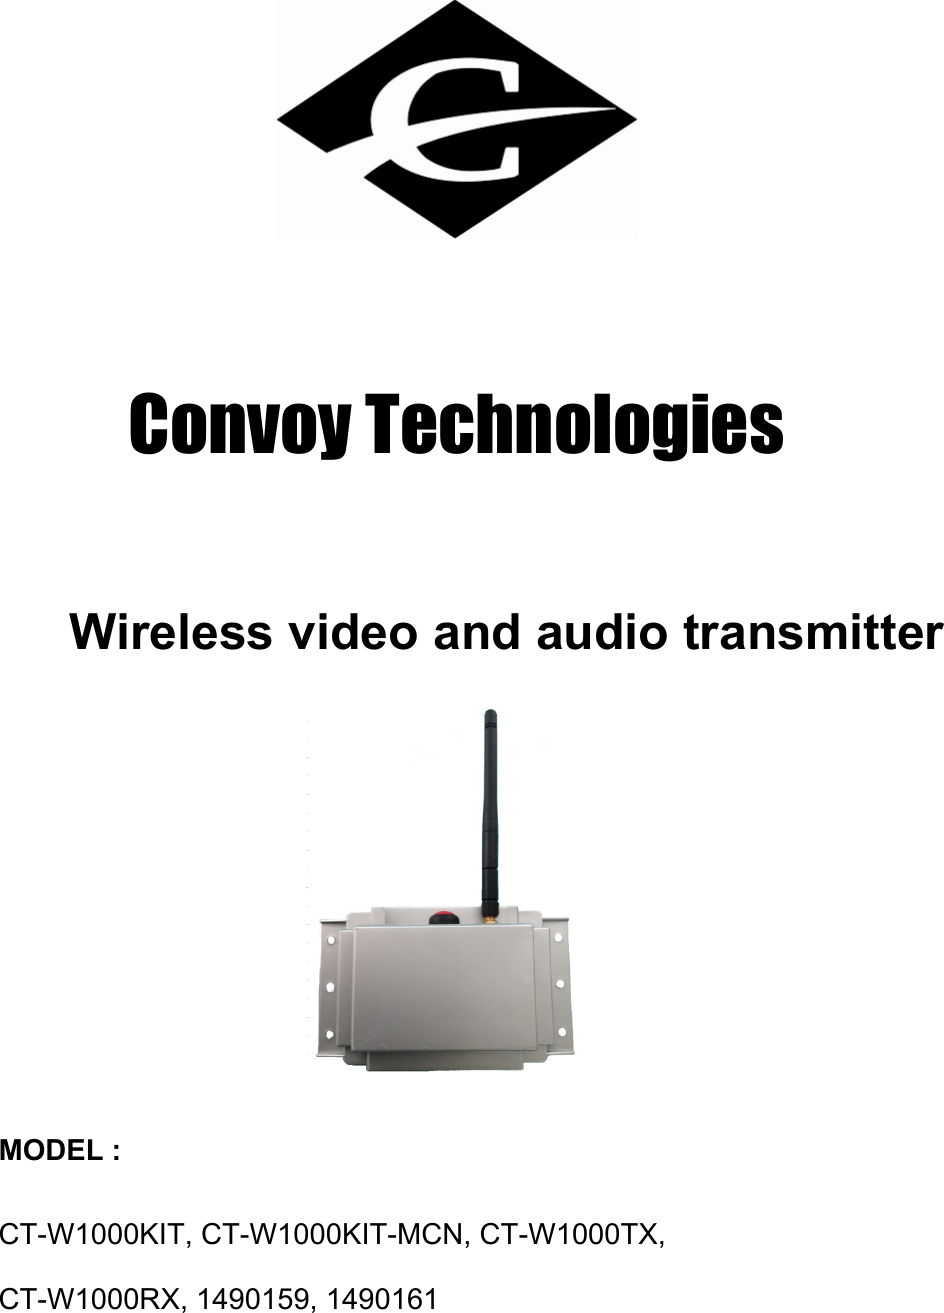   Convoy Technologies Wireless video and audio transmitter     MODEL :  CT-W1000KIT, CT-W1000KIT-MCN, CT-W1000TX, CT-W1000RX, 1490159, 1490161   